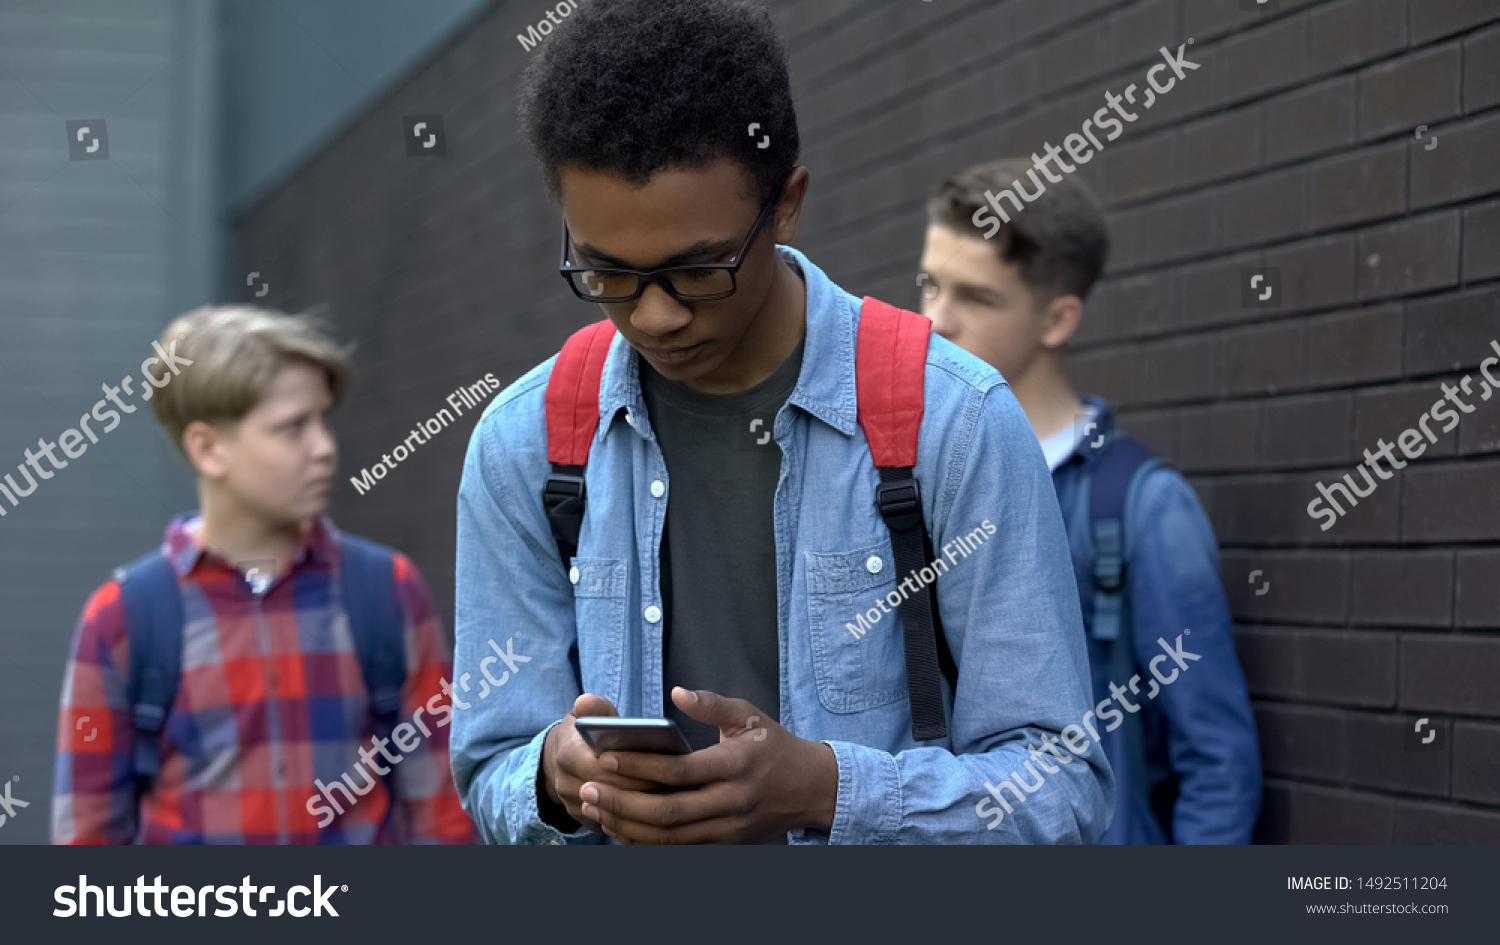 Black student reading offensive post in phone, boys mock behind, cyberbullying #1492511204